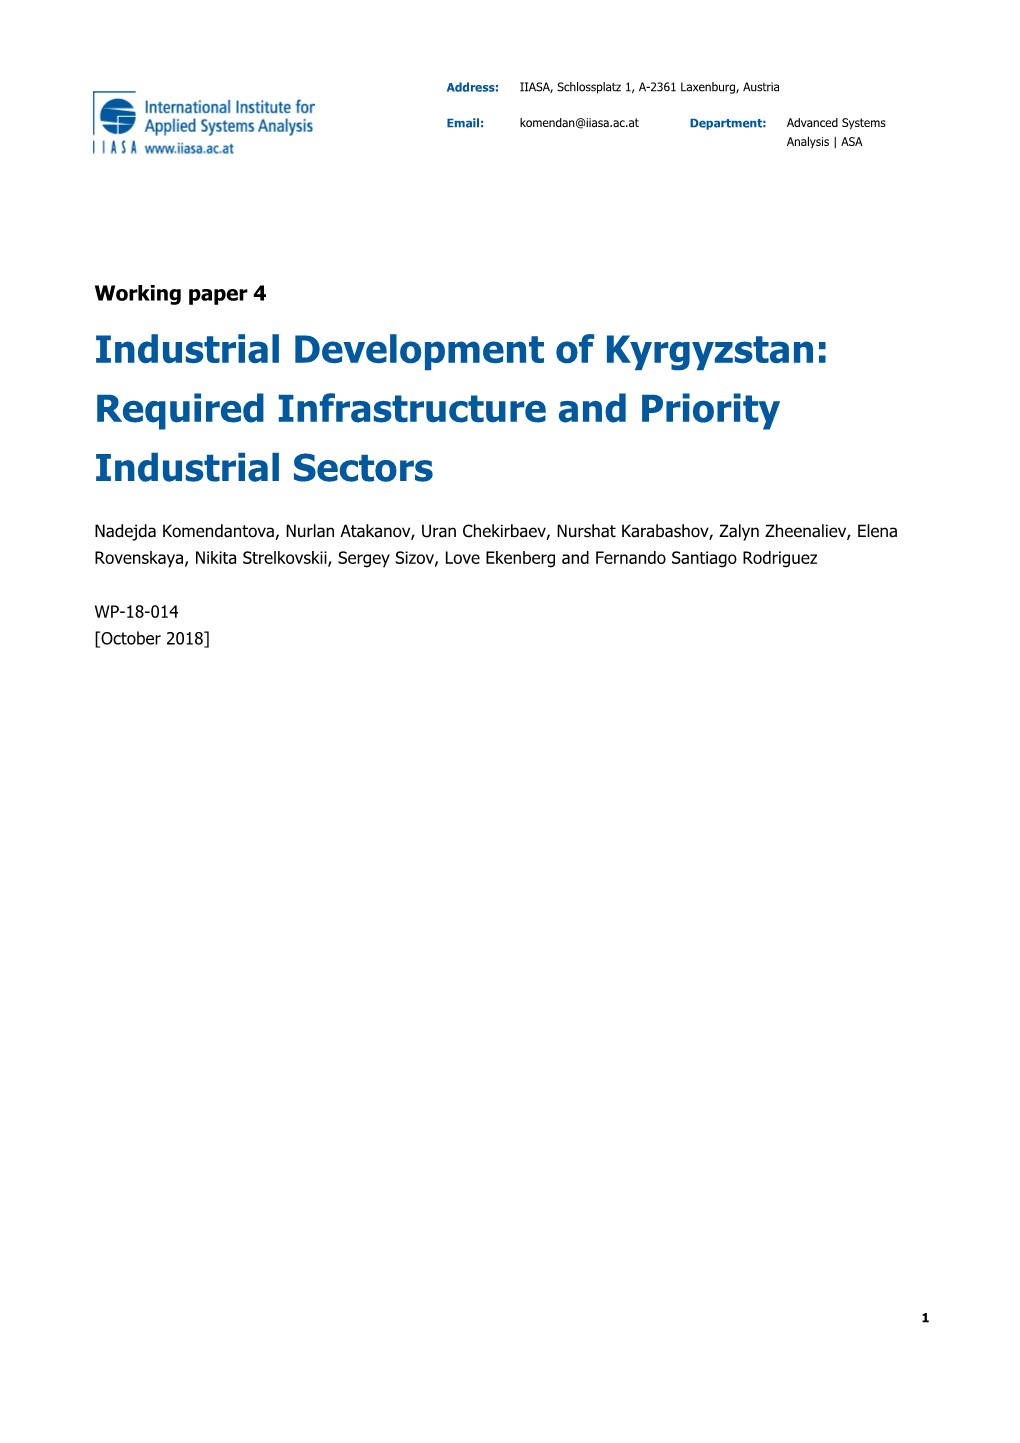 Industrial Development of Kyrgyzstan: Required Infrastructure and Priority Industrial Sectors